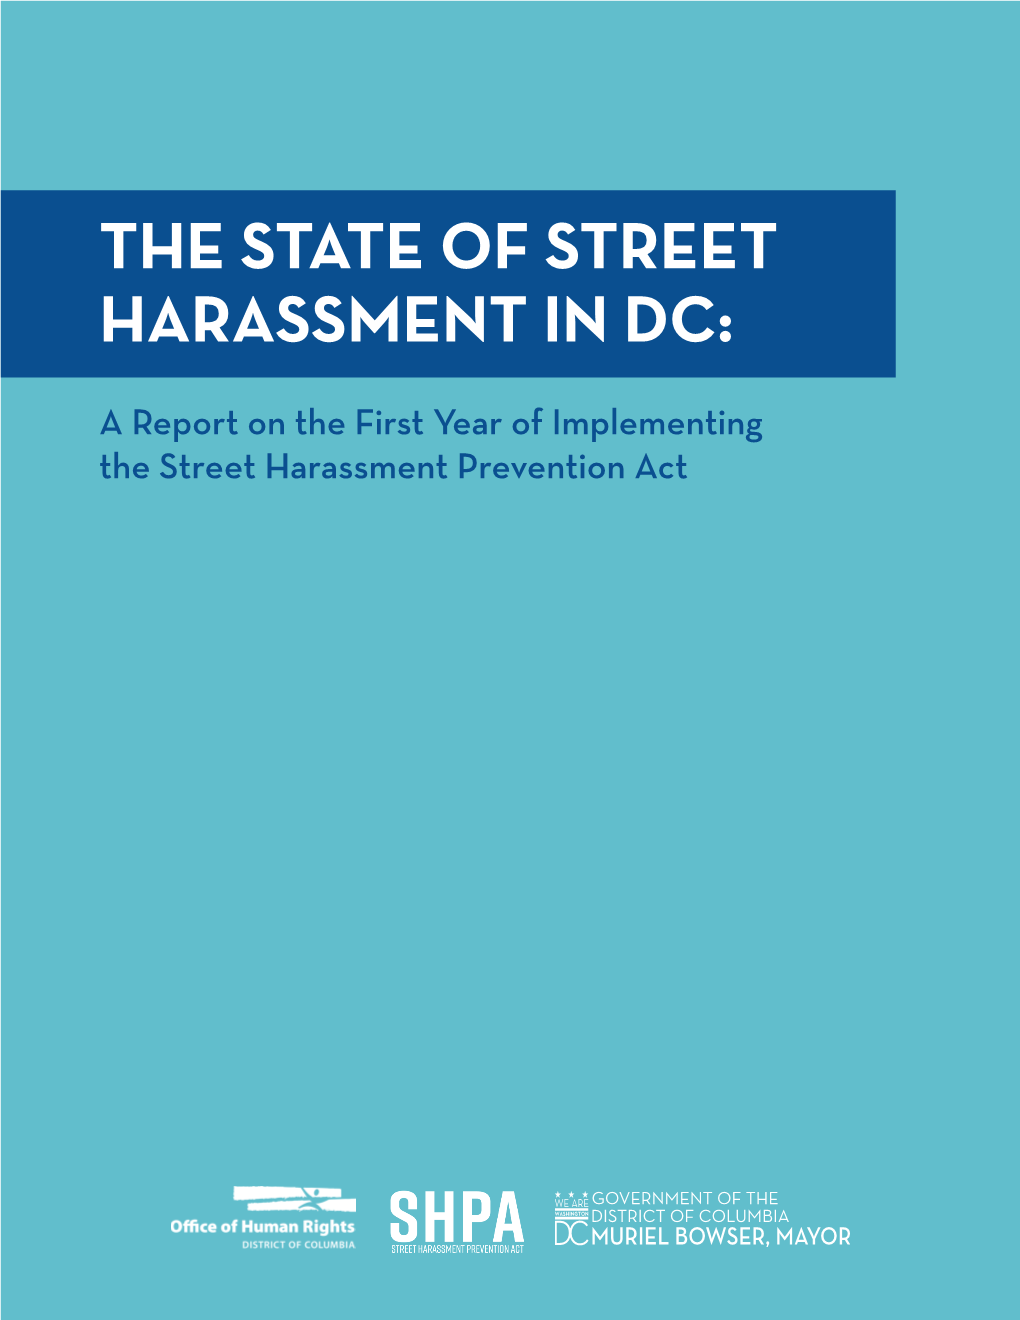 The State of Street Harassment in Dc